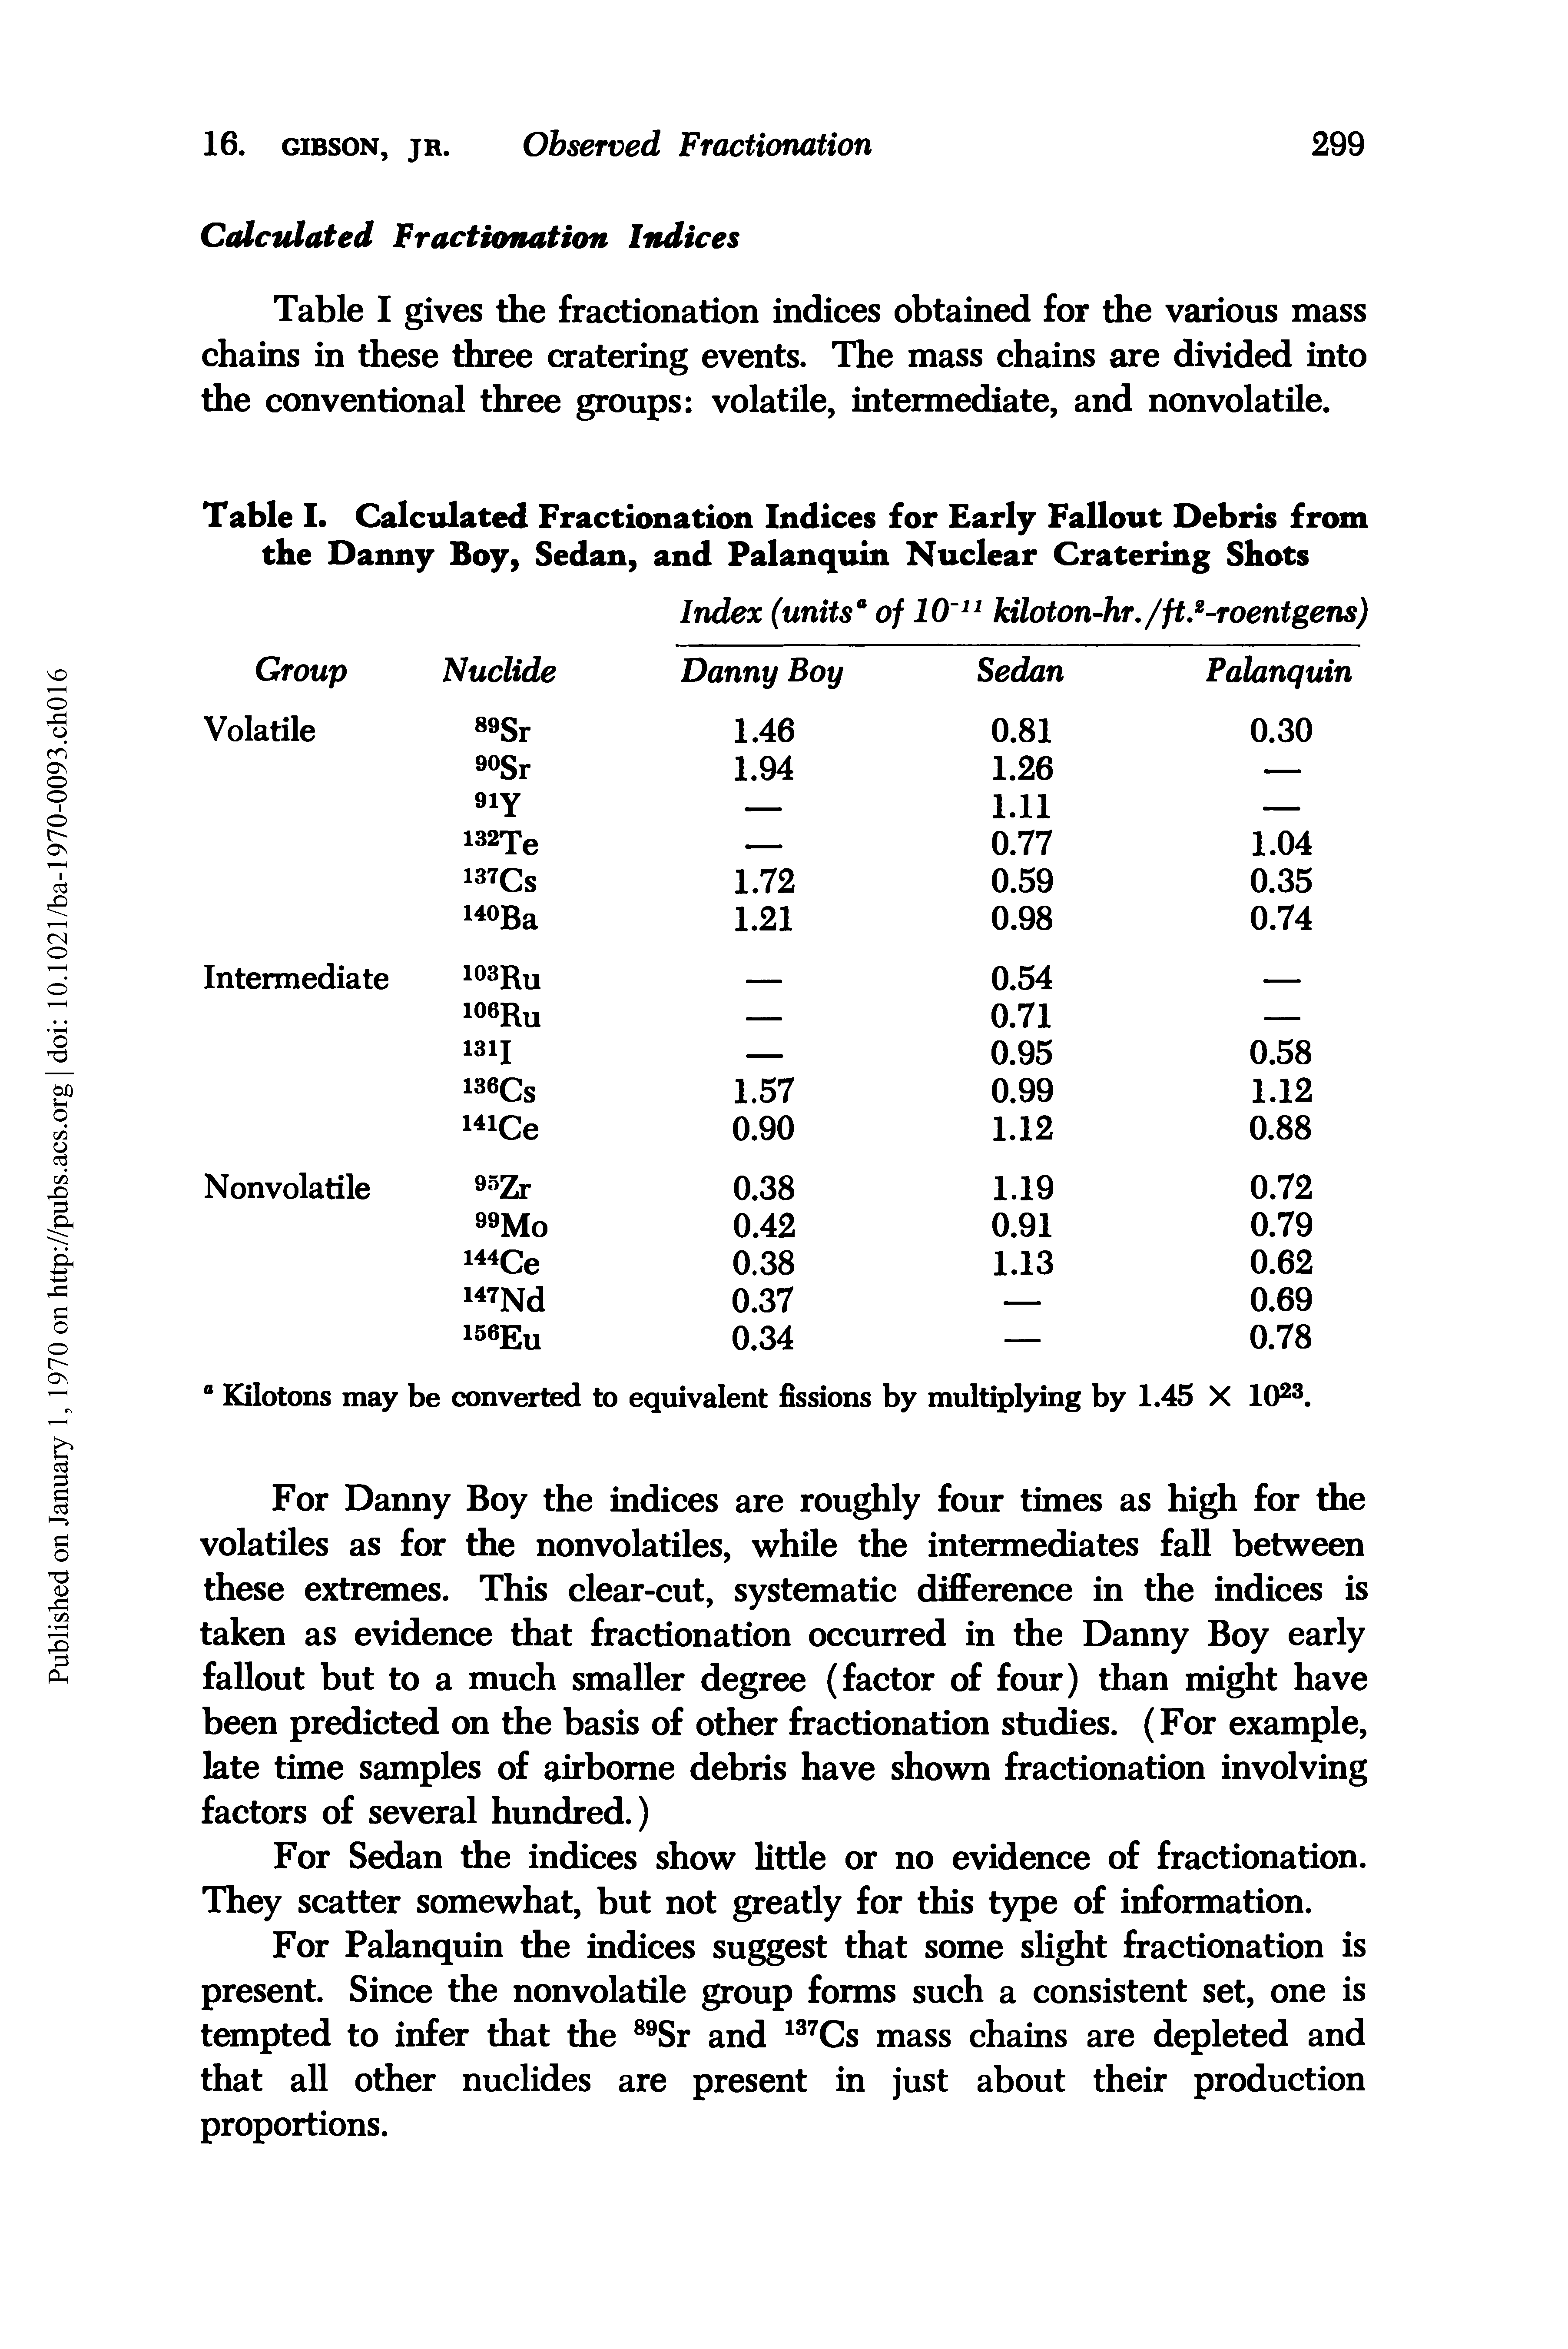 Table I gives the fractionation indices obtained for the various mass chains in these three cratering events. The mass chains are divided into the conventional three groups volatile, intermediate, and nonvolatile.